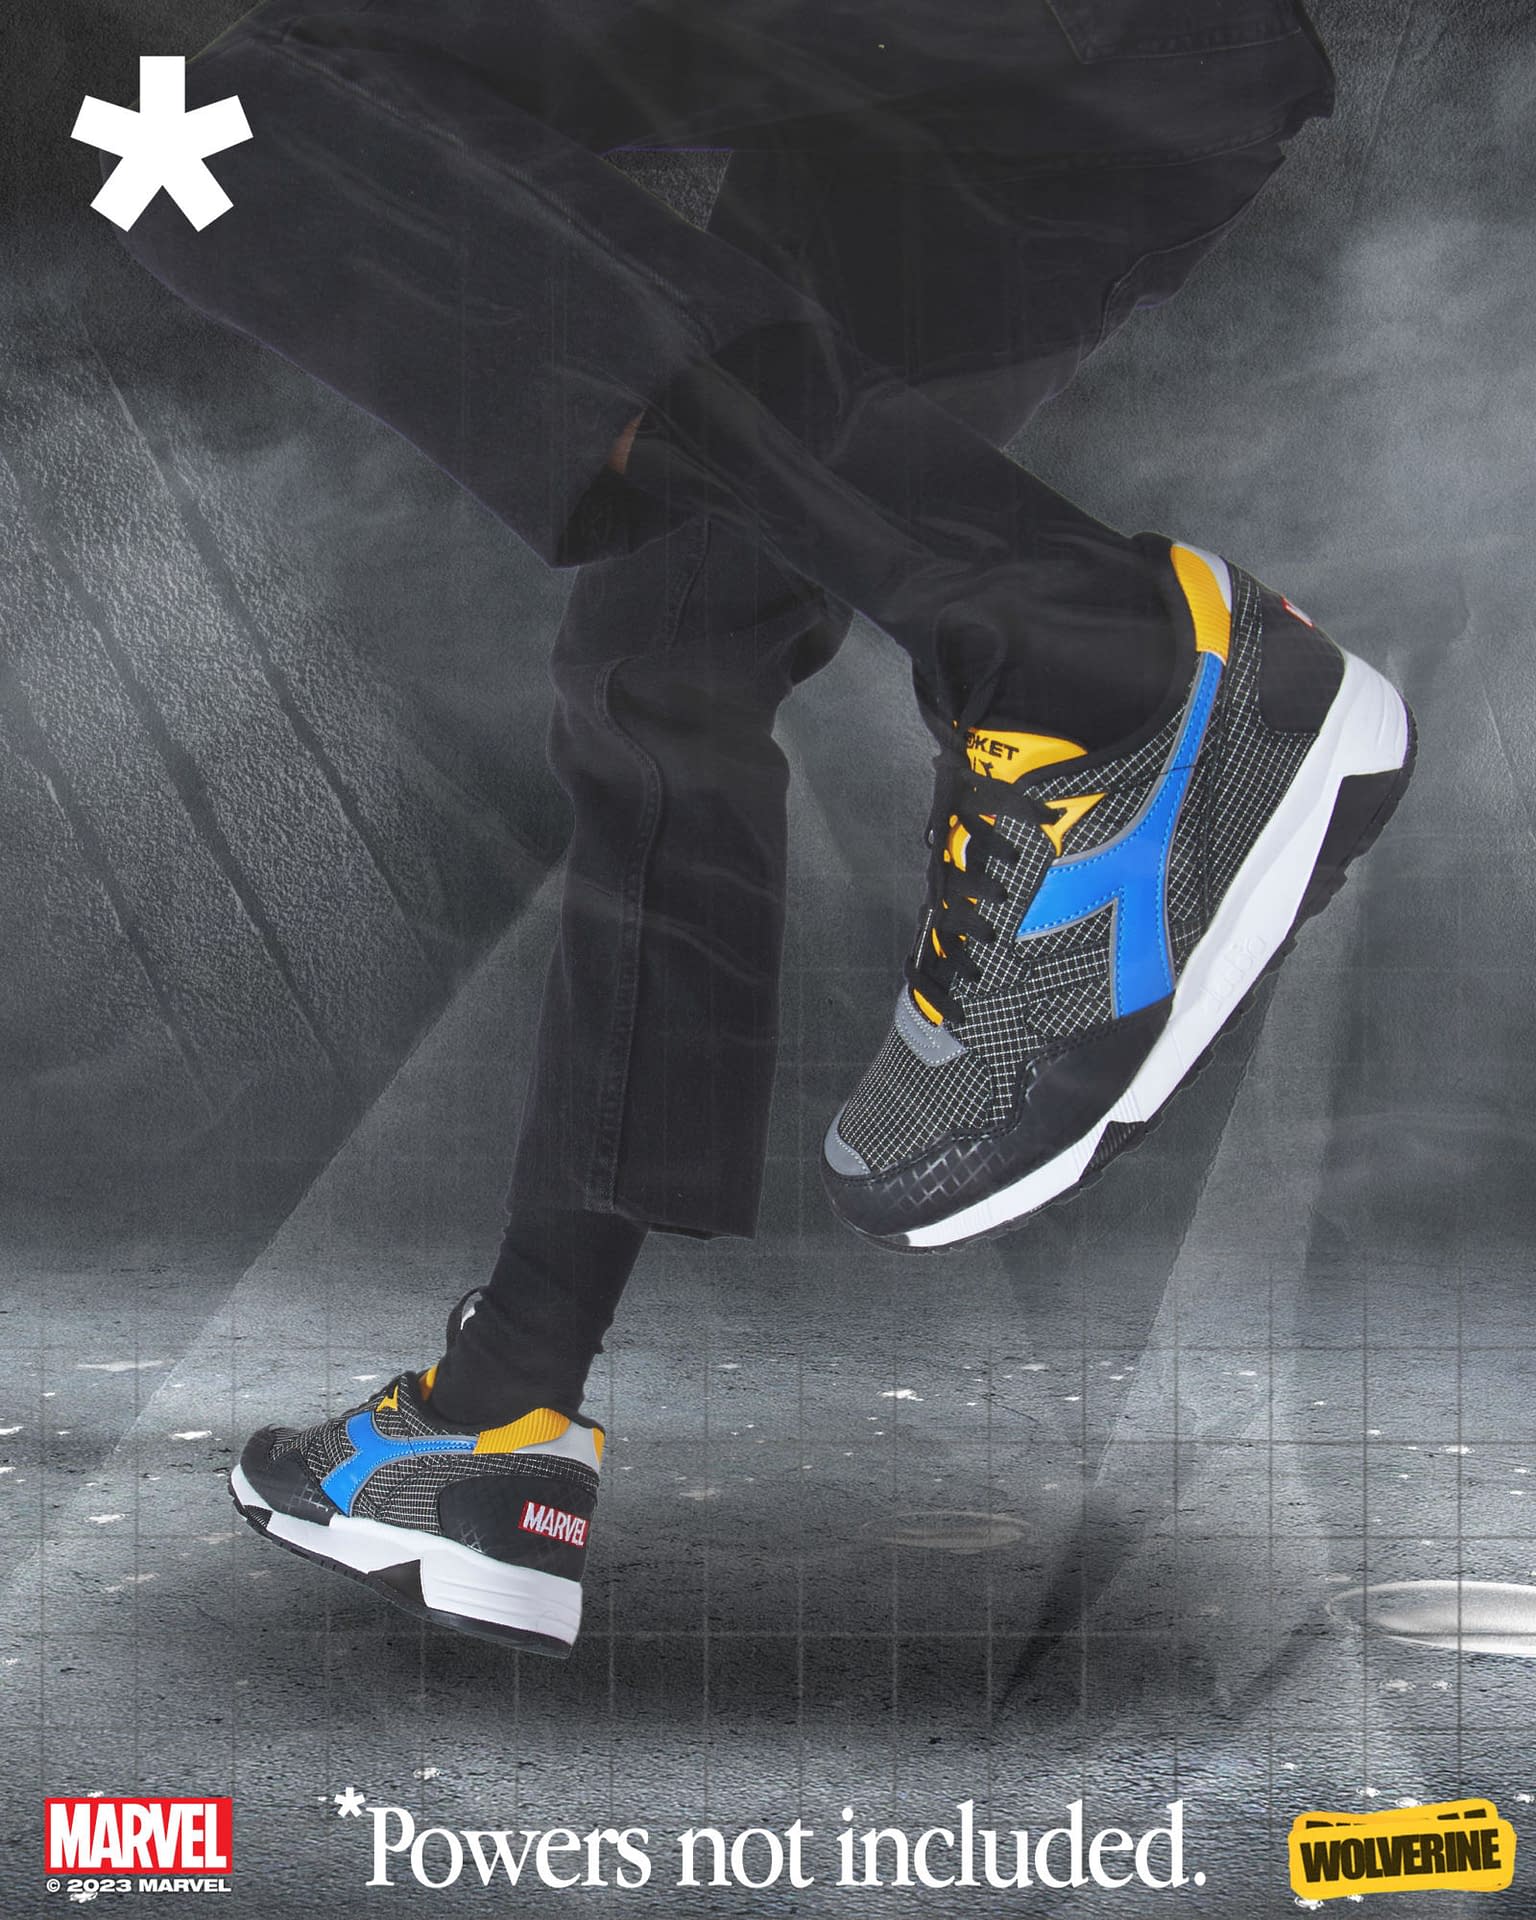 Foot Locker Summons the X-Men with New Diadora Shoe Collection